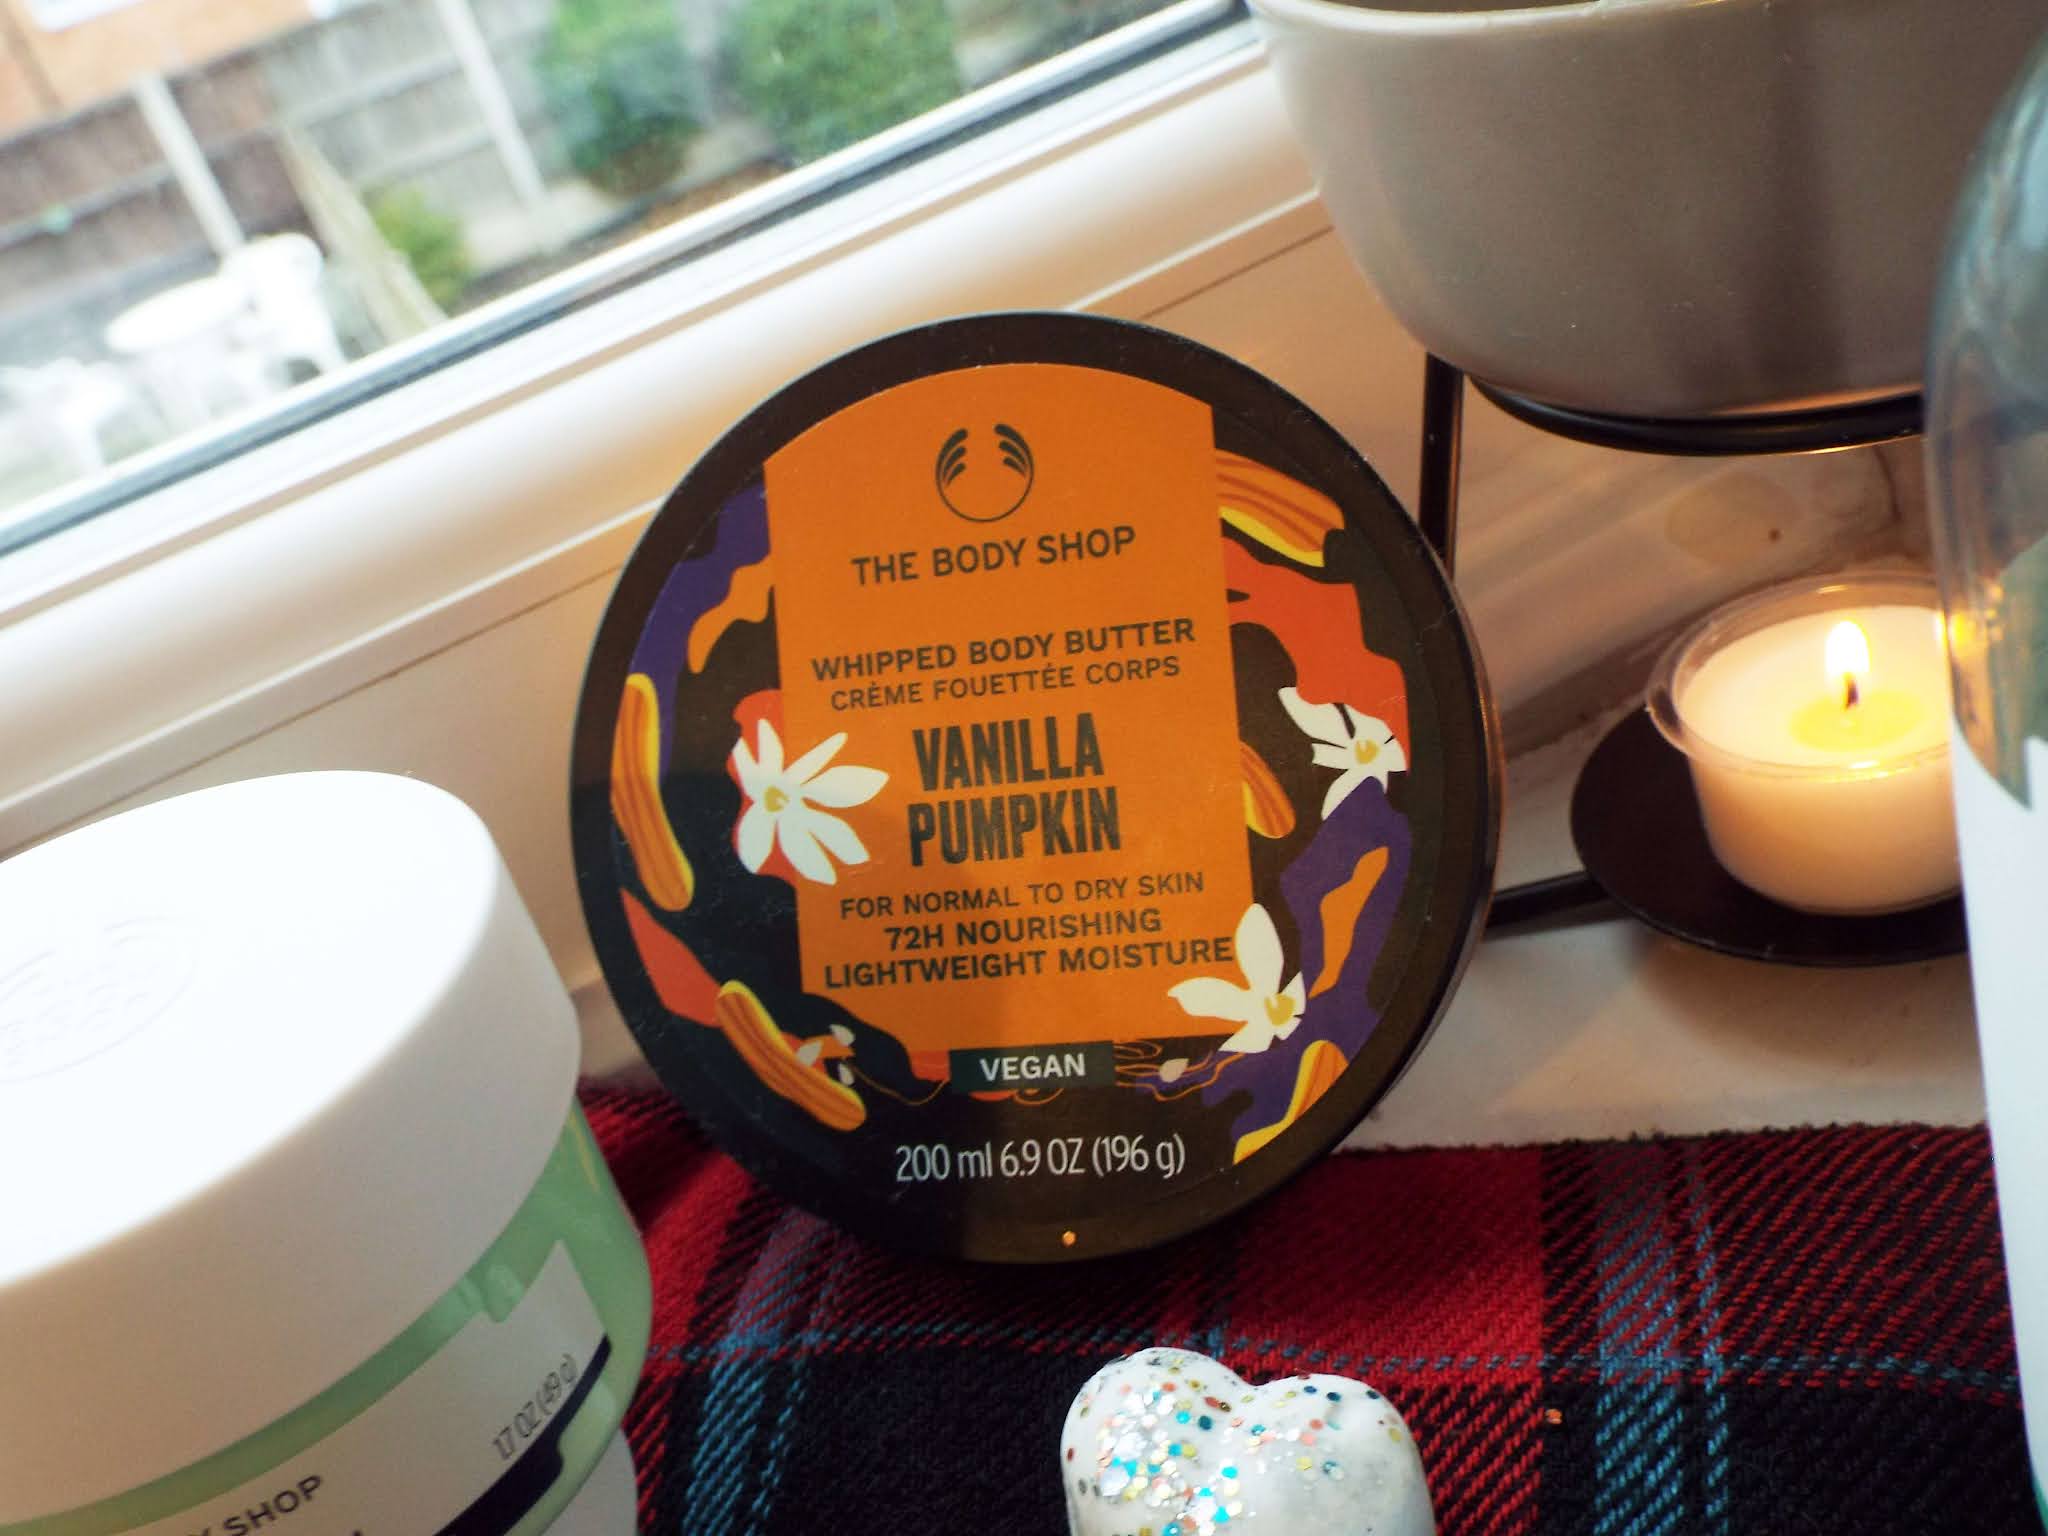 The Body Shop Vanilla Pumpkin Body Butter, sat on tartan scarf in the nook of a windowsill, with wax melter burning to background and other surrounding beauty products.